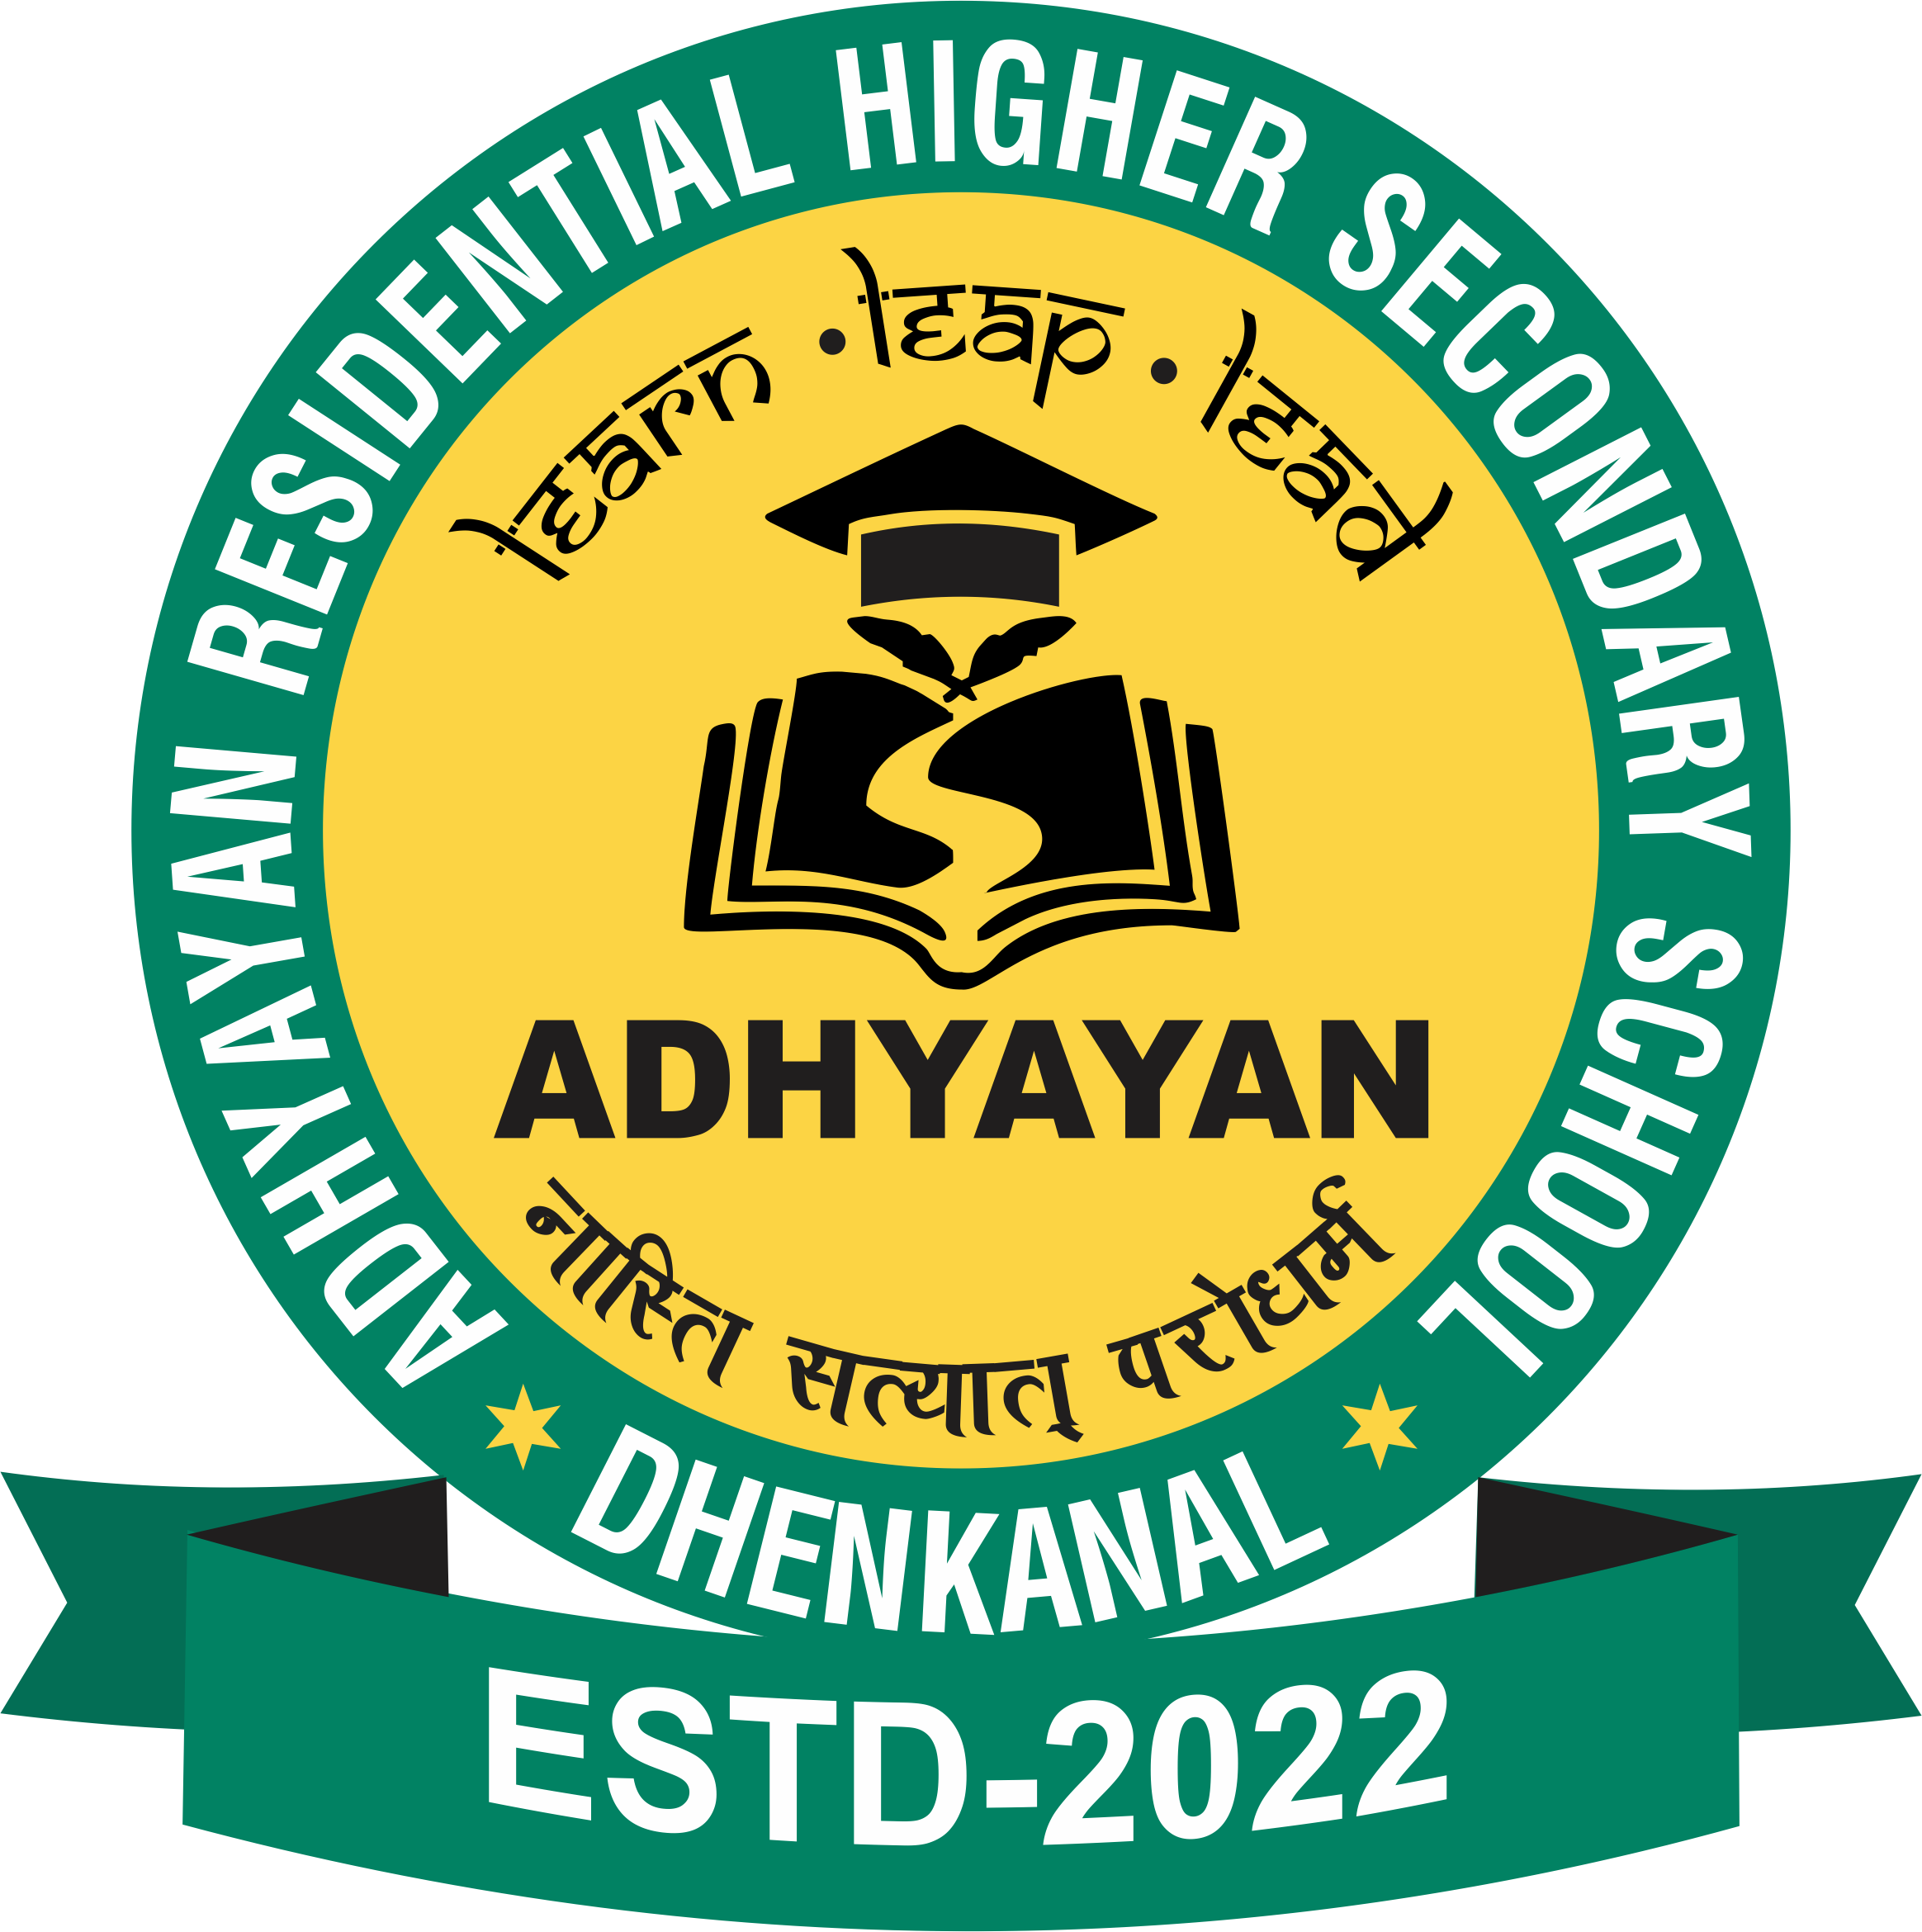 ADHYAYAN RESIDENTIAL HIGHER SECONDARY SCHOOL
                TOWN PLANNING, DHENKANAL